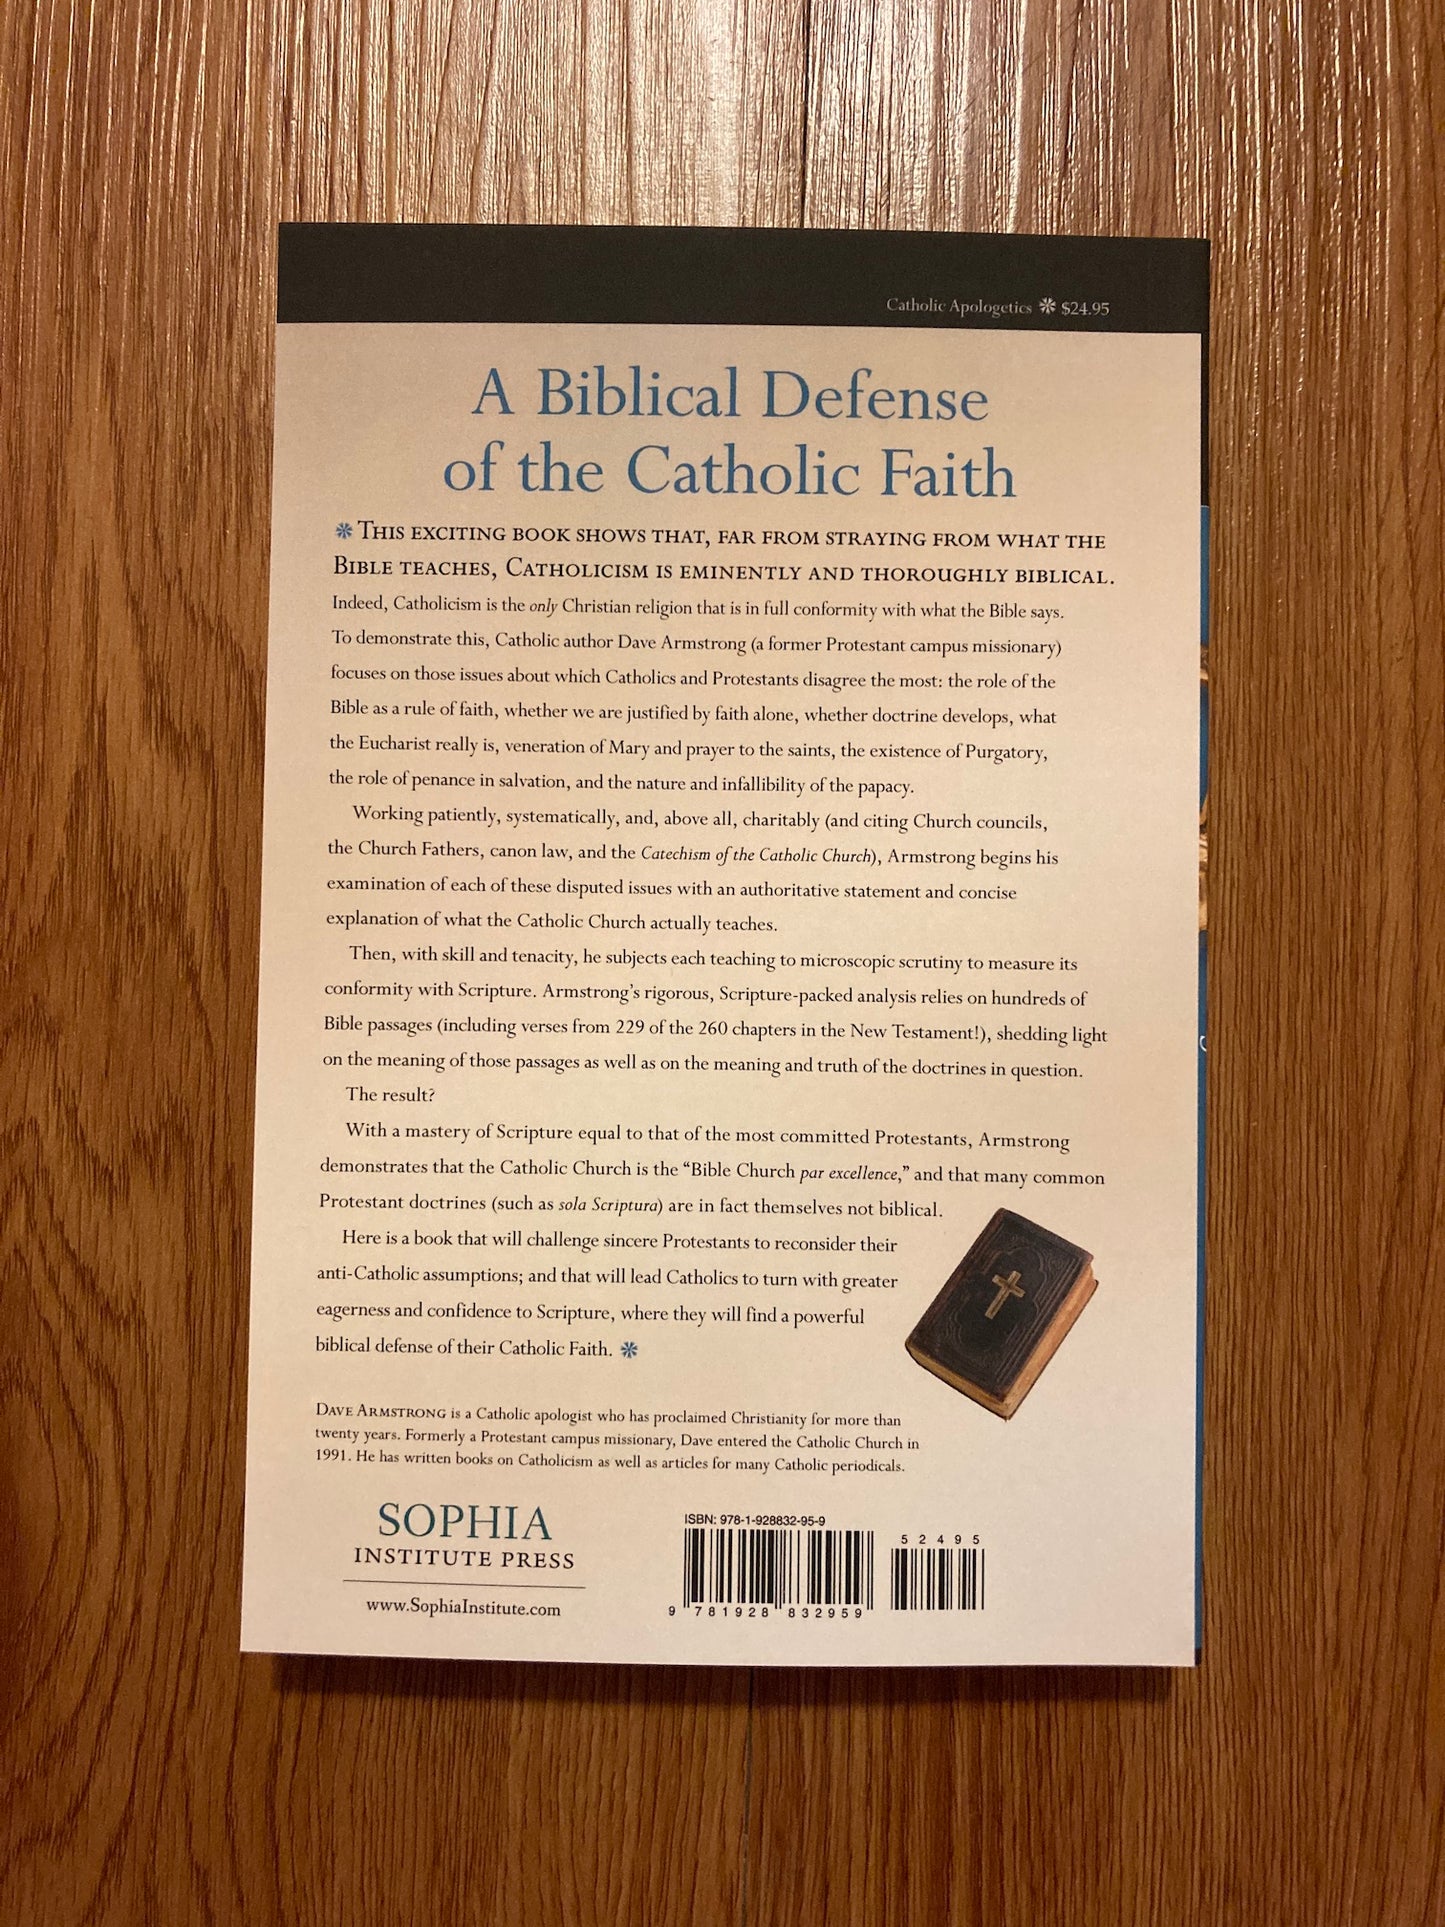 A Biblical Defense of Catholicism, by Dave Armstrong